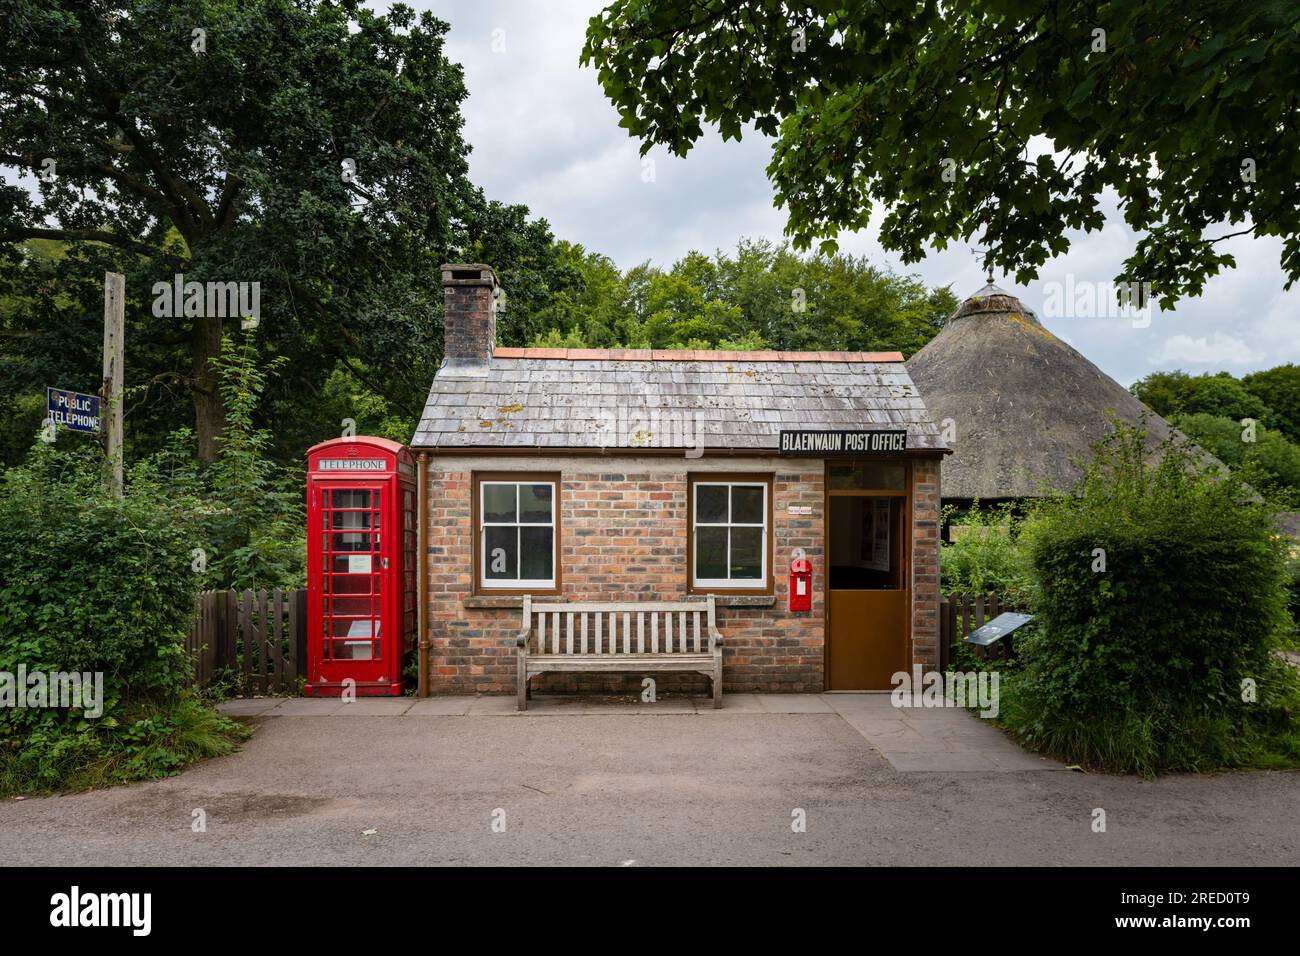 Post Office, St. Fagans National Museum of History, Cardiff, Wales, UK Stock Photo